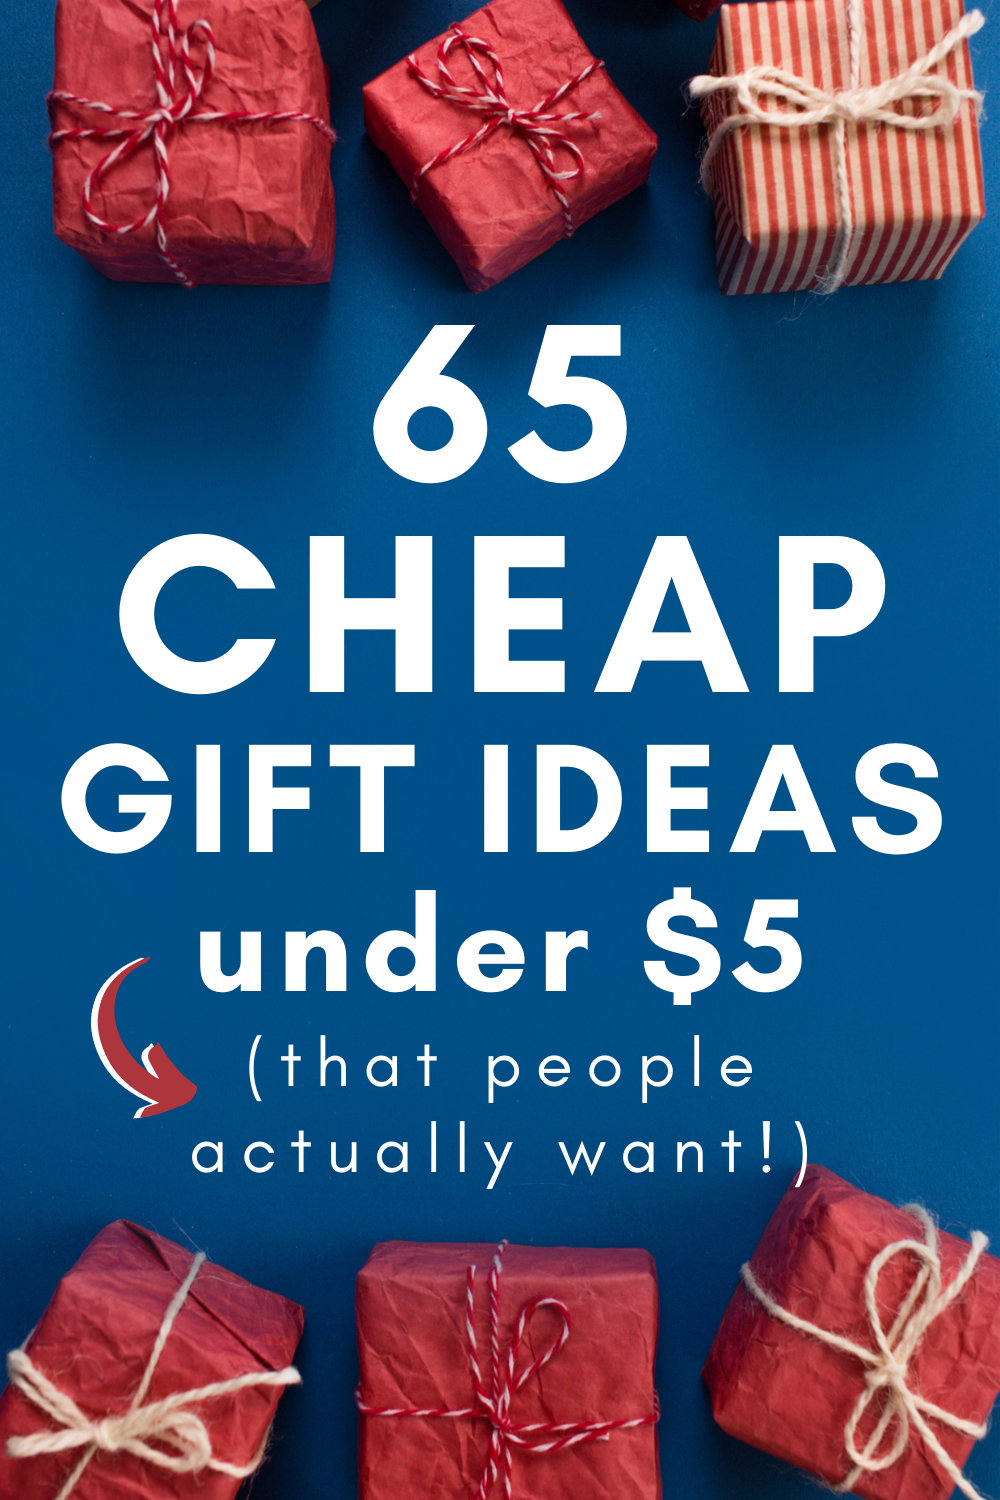 Best $5 and under  Prime gifts